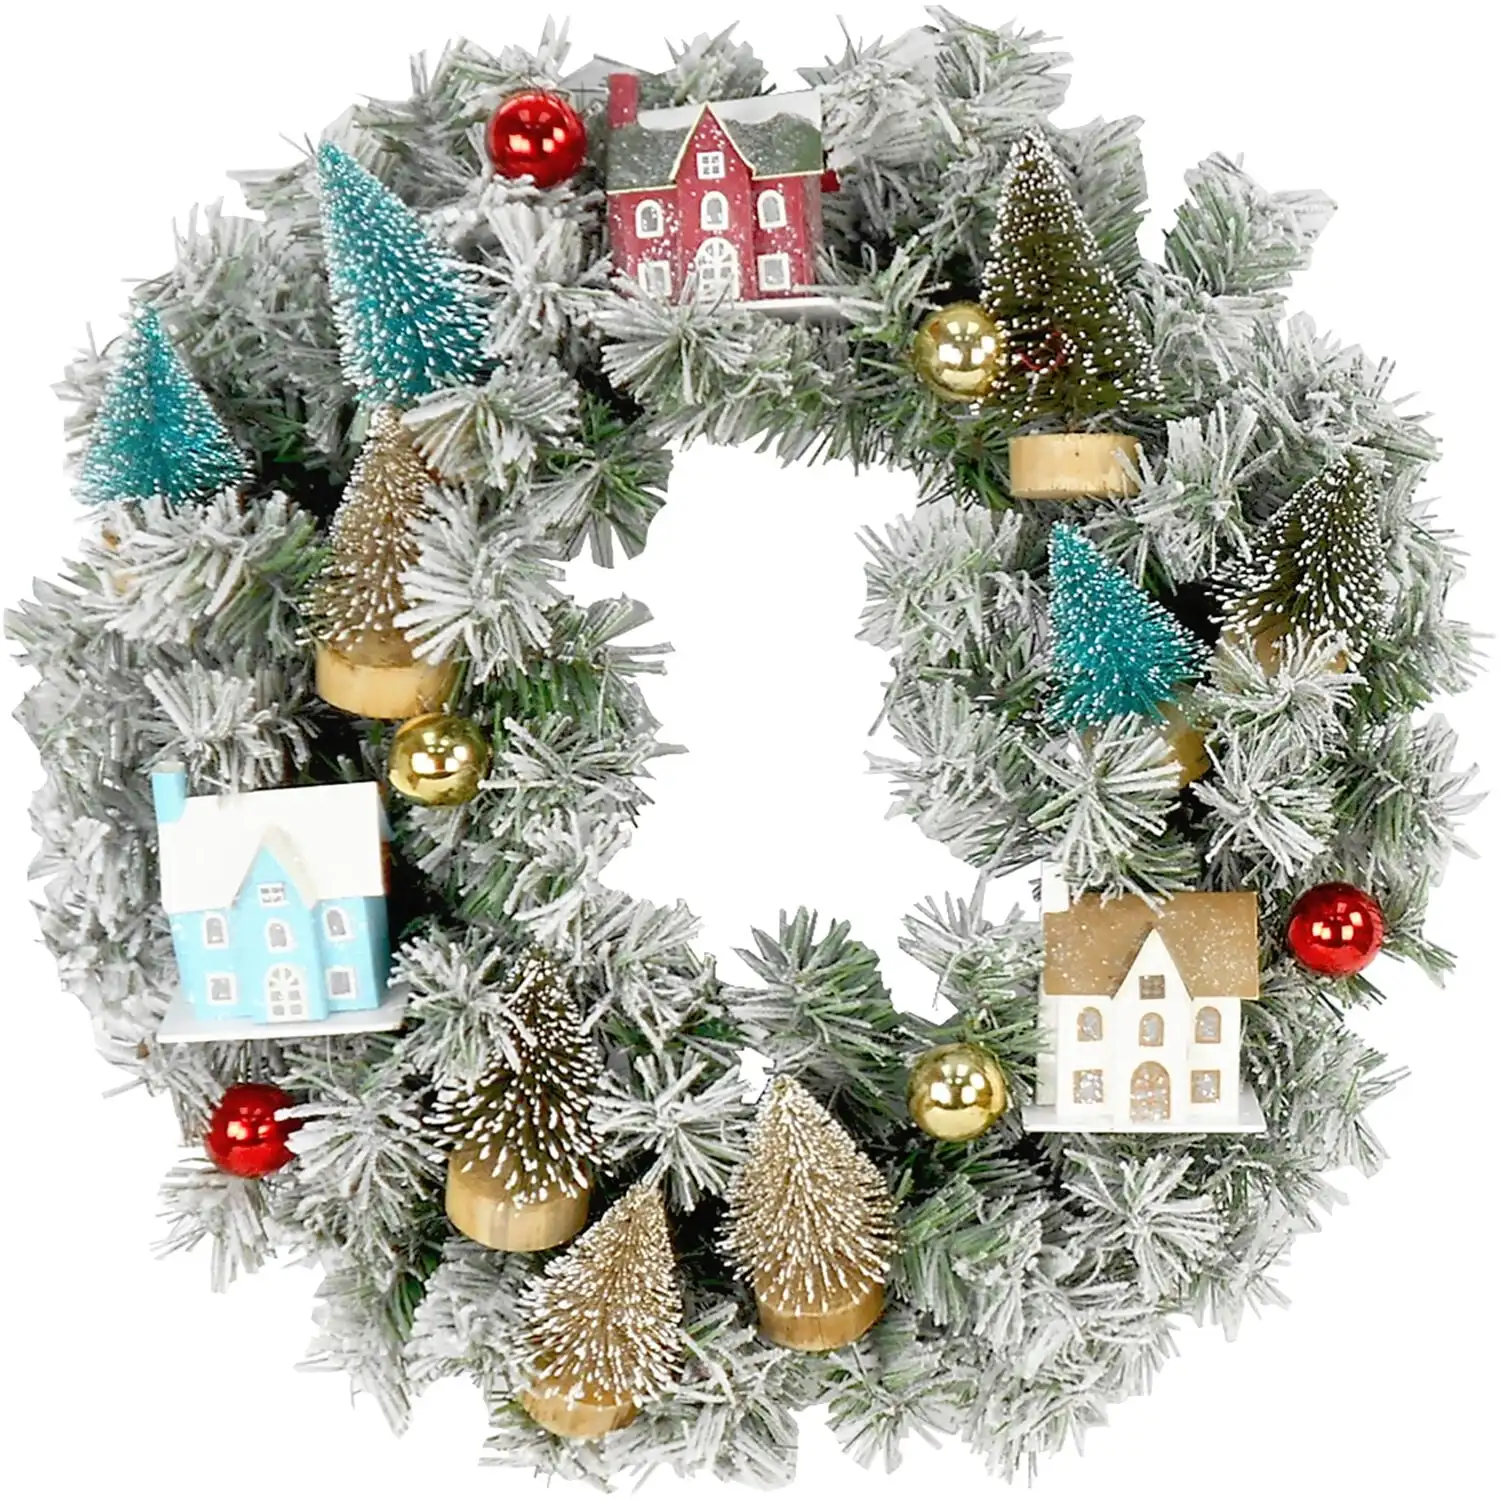 

Fraser Hill Farm 24-in. Christmas Snowy Wreath Door Hanging with Ornaments, Wood Houses, Green